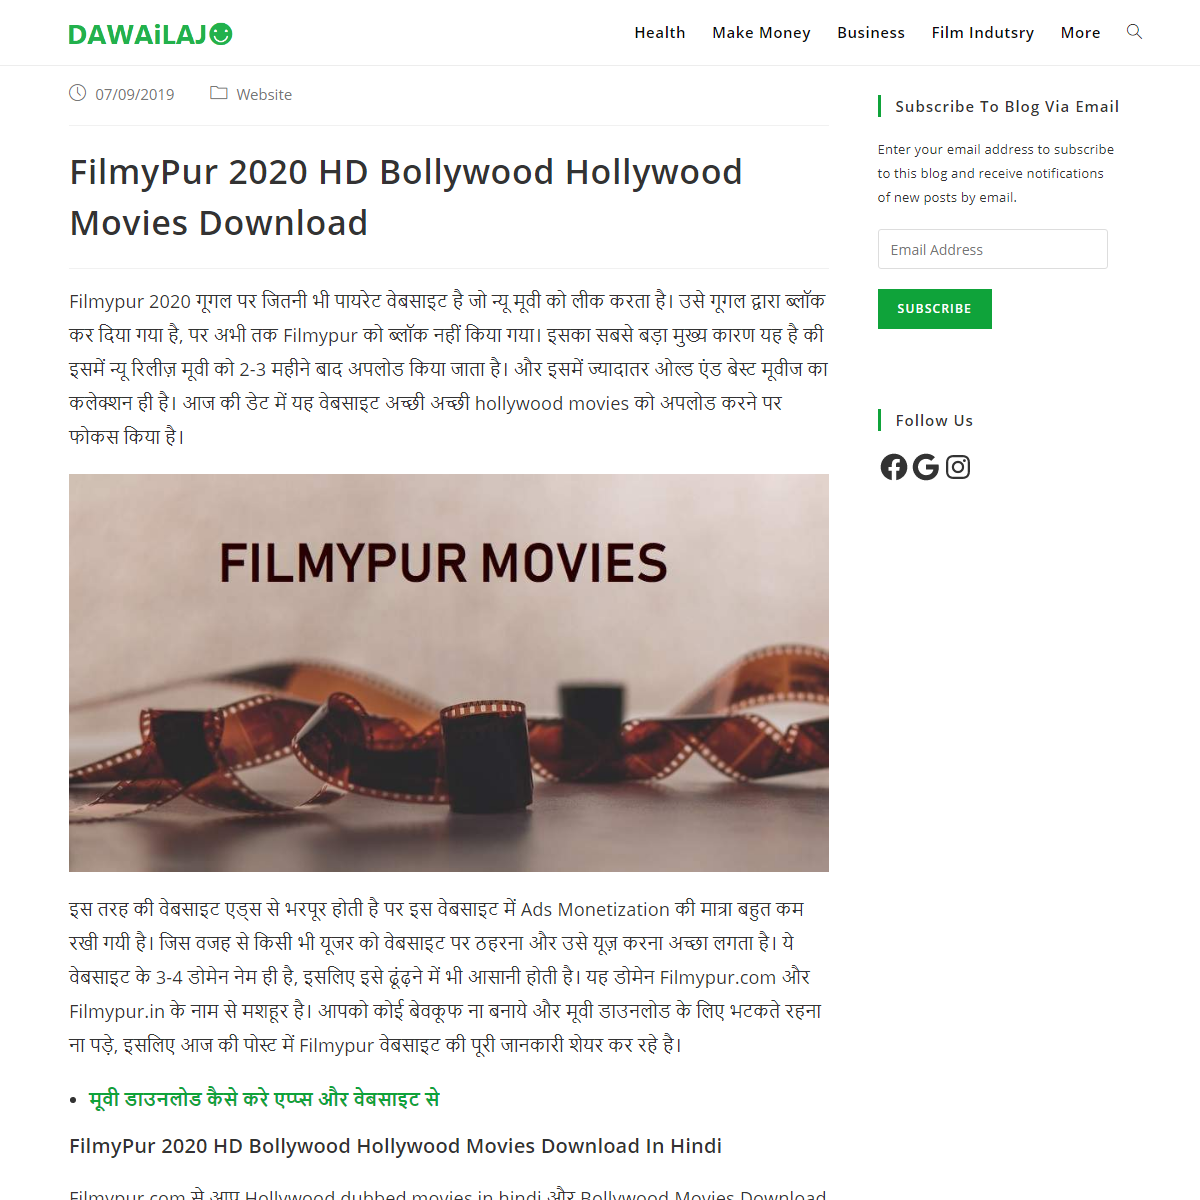 A complete backup of https://dawailaj.com/filmypur-bollywood-movies-download/